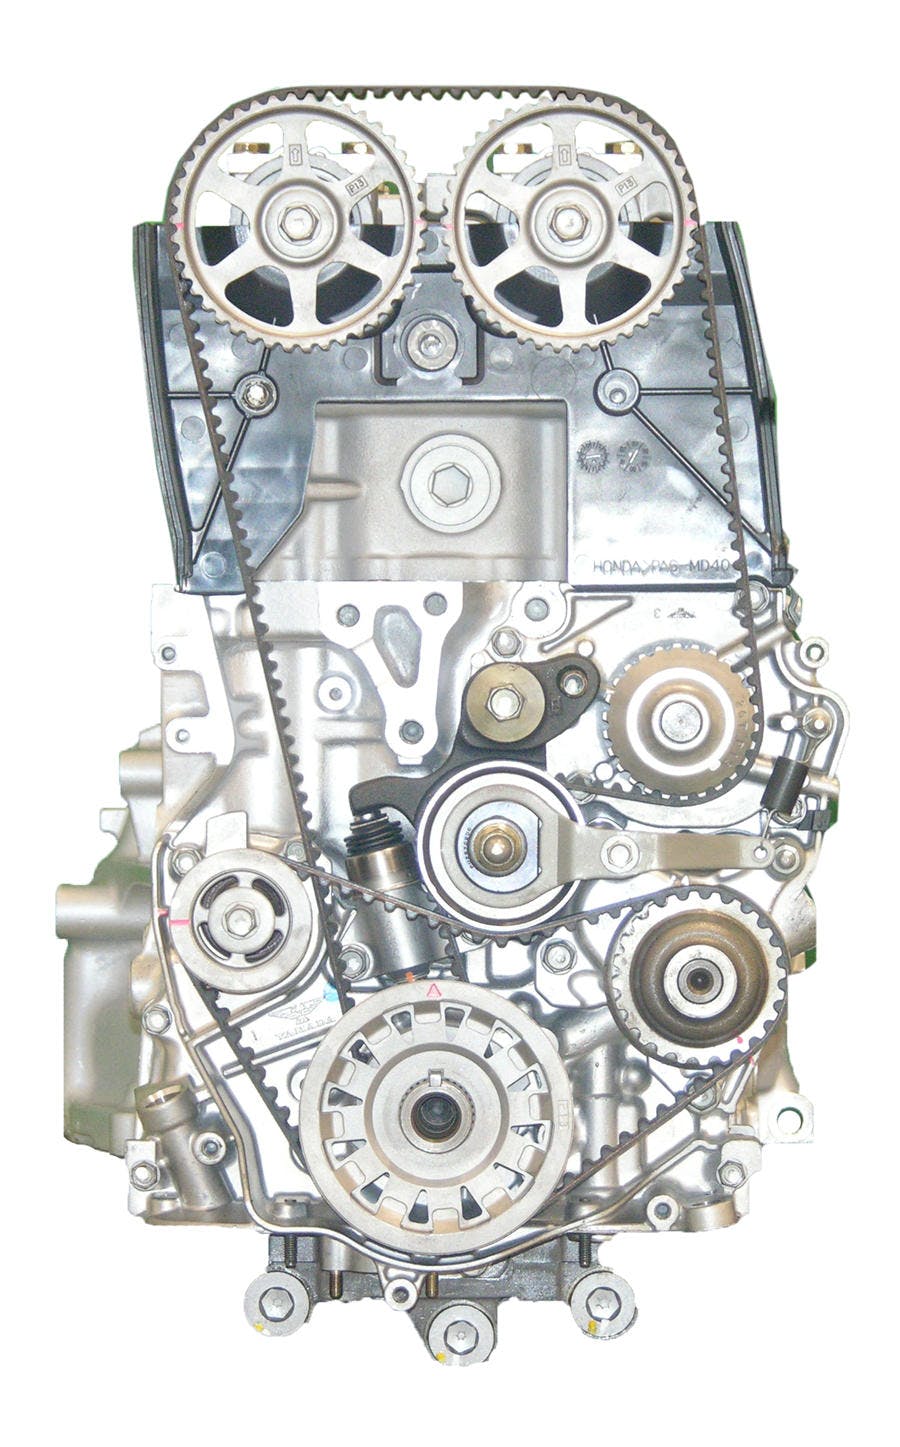 2.2L Inline-4 Engine for 1997 Honda Prelude